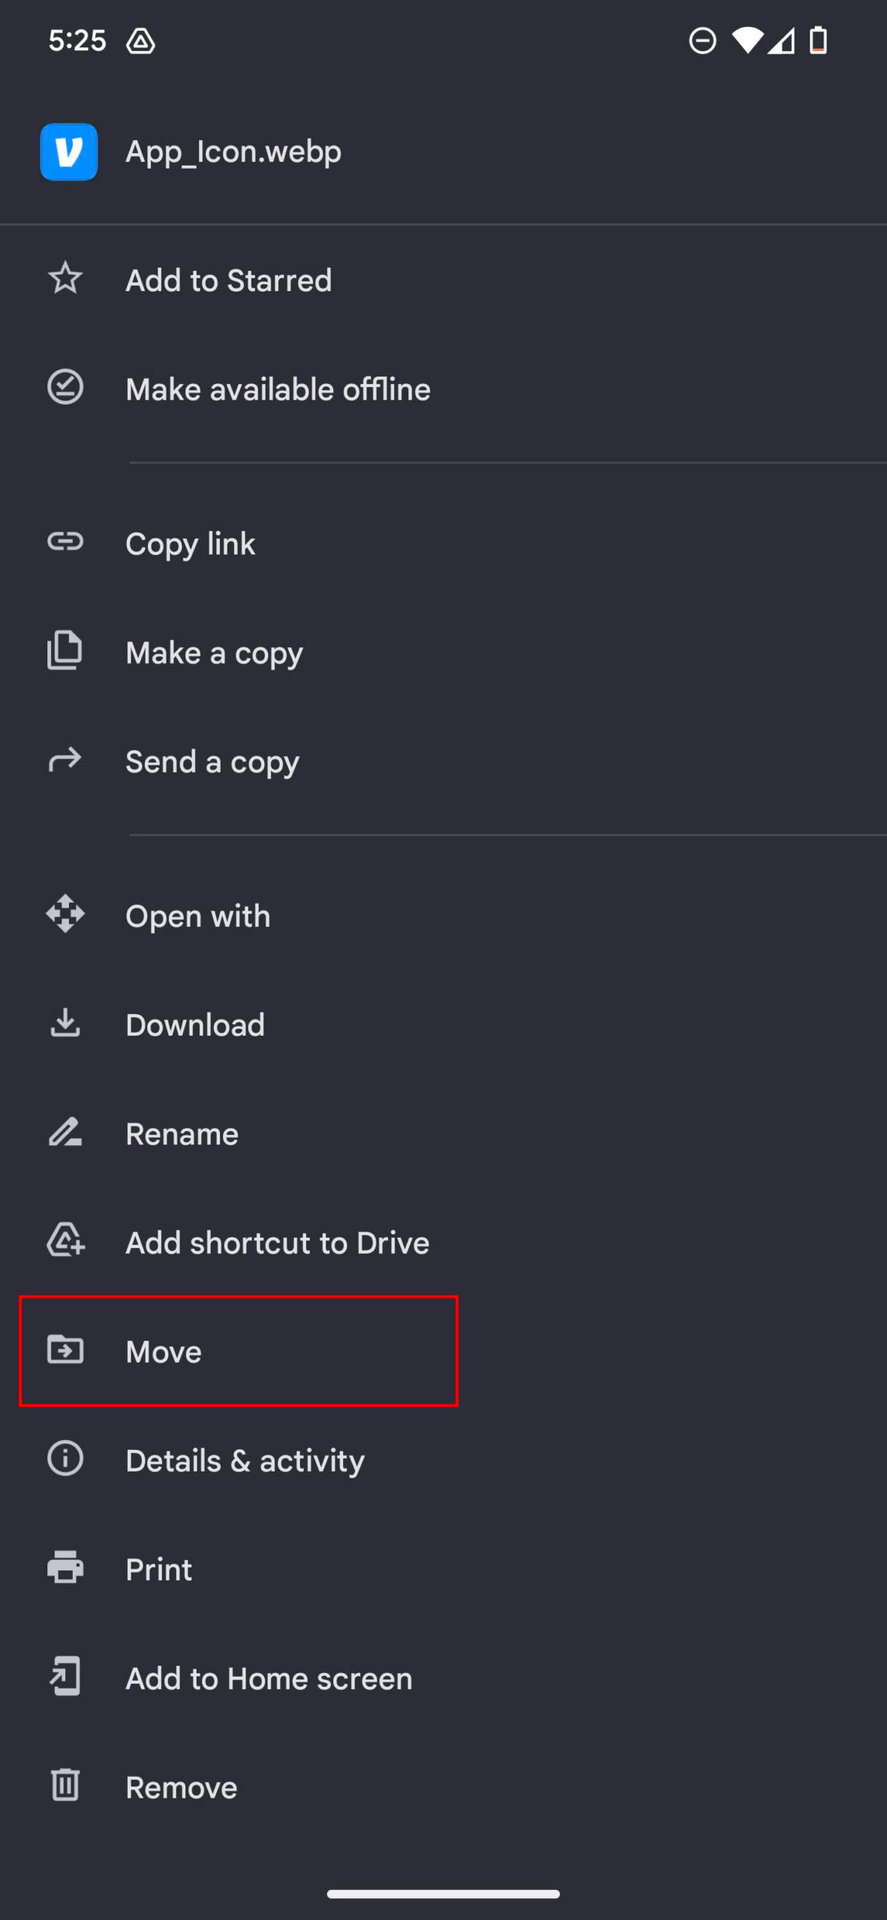 How to use Google Drive: Step-by-step tutorial - Android Authority